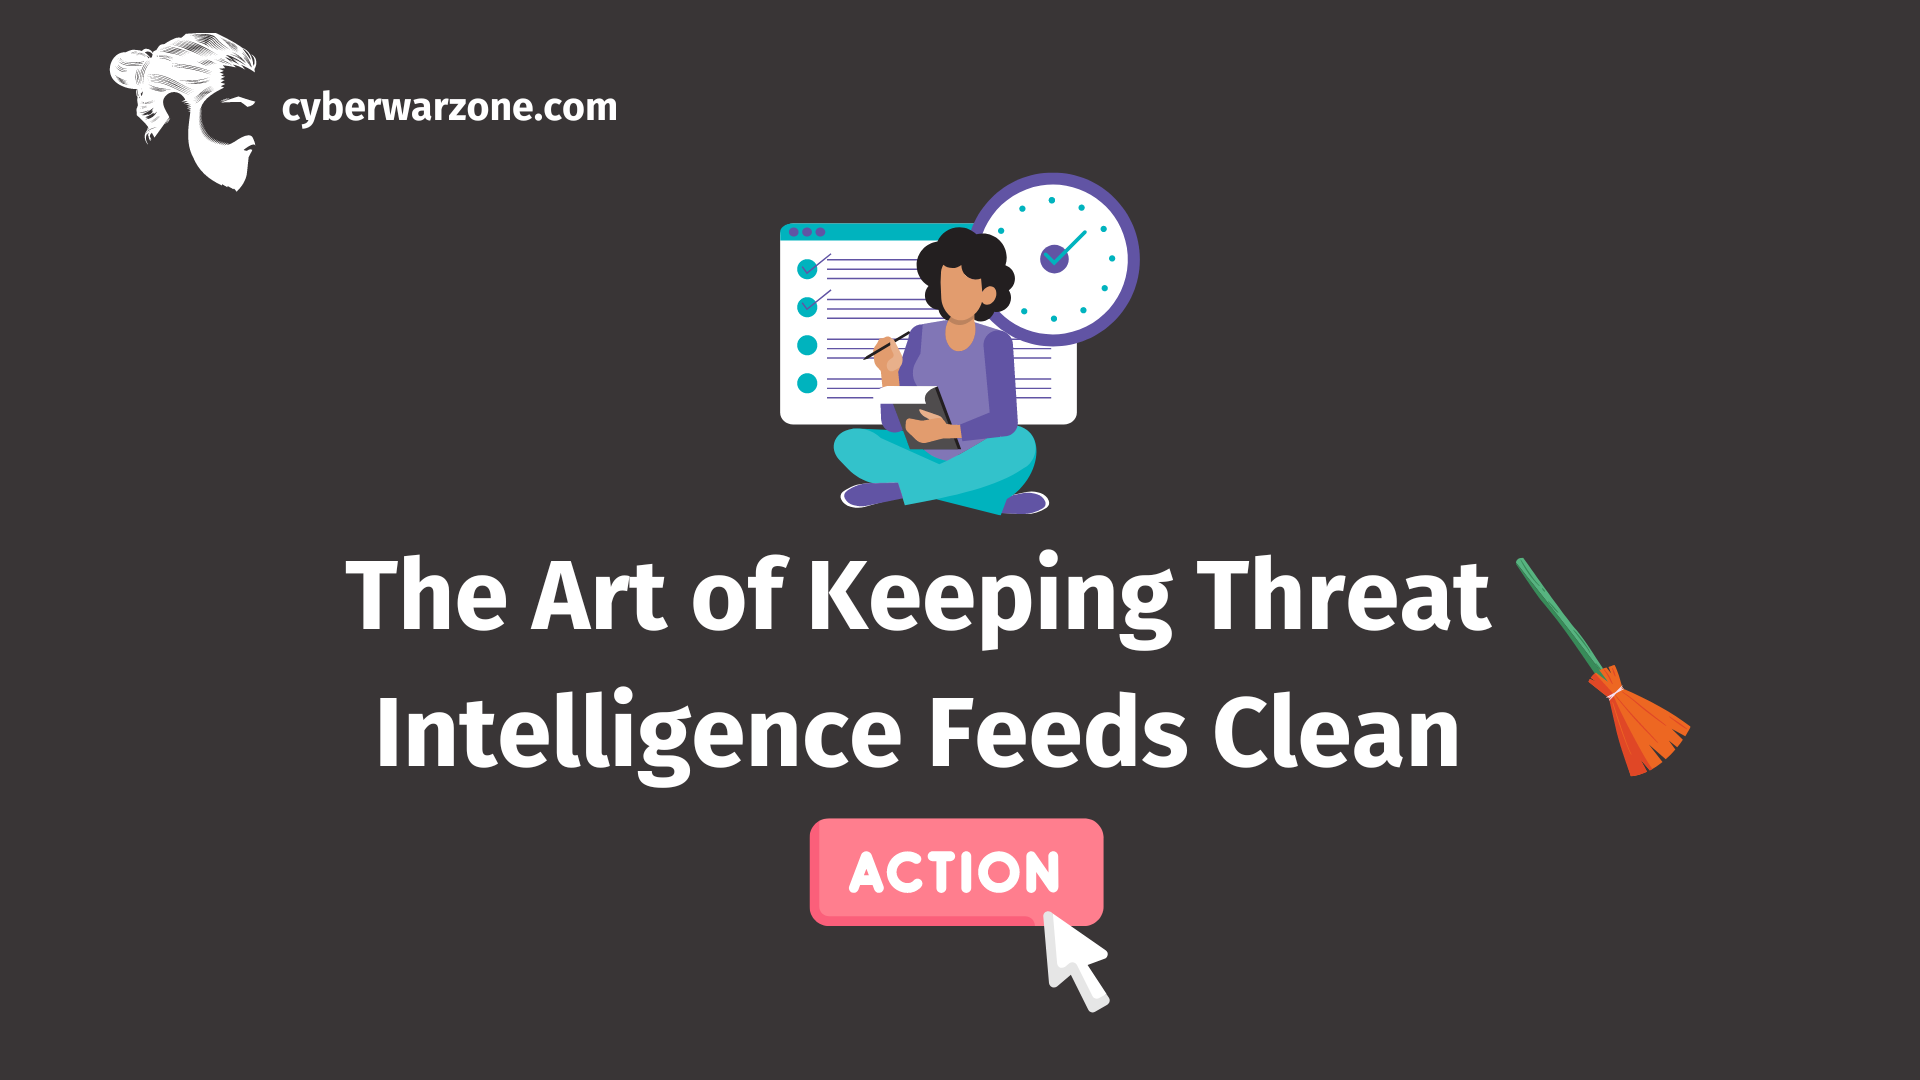 The Art of Keeping Threat Intelligence Feeds Clean